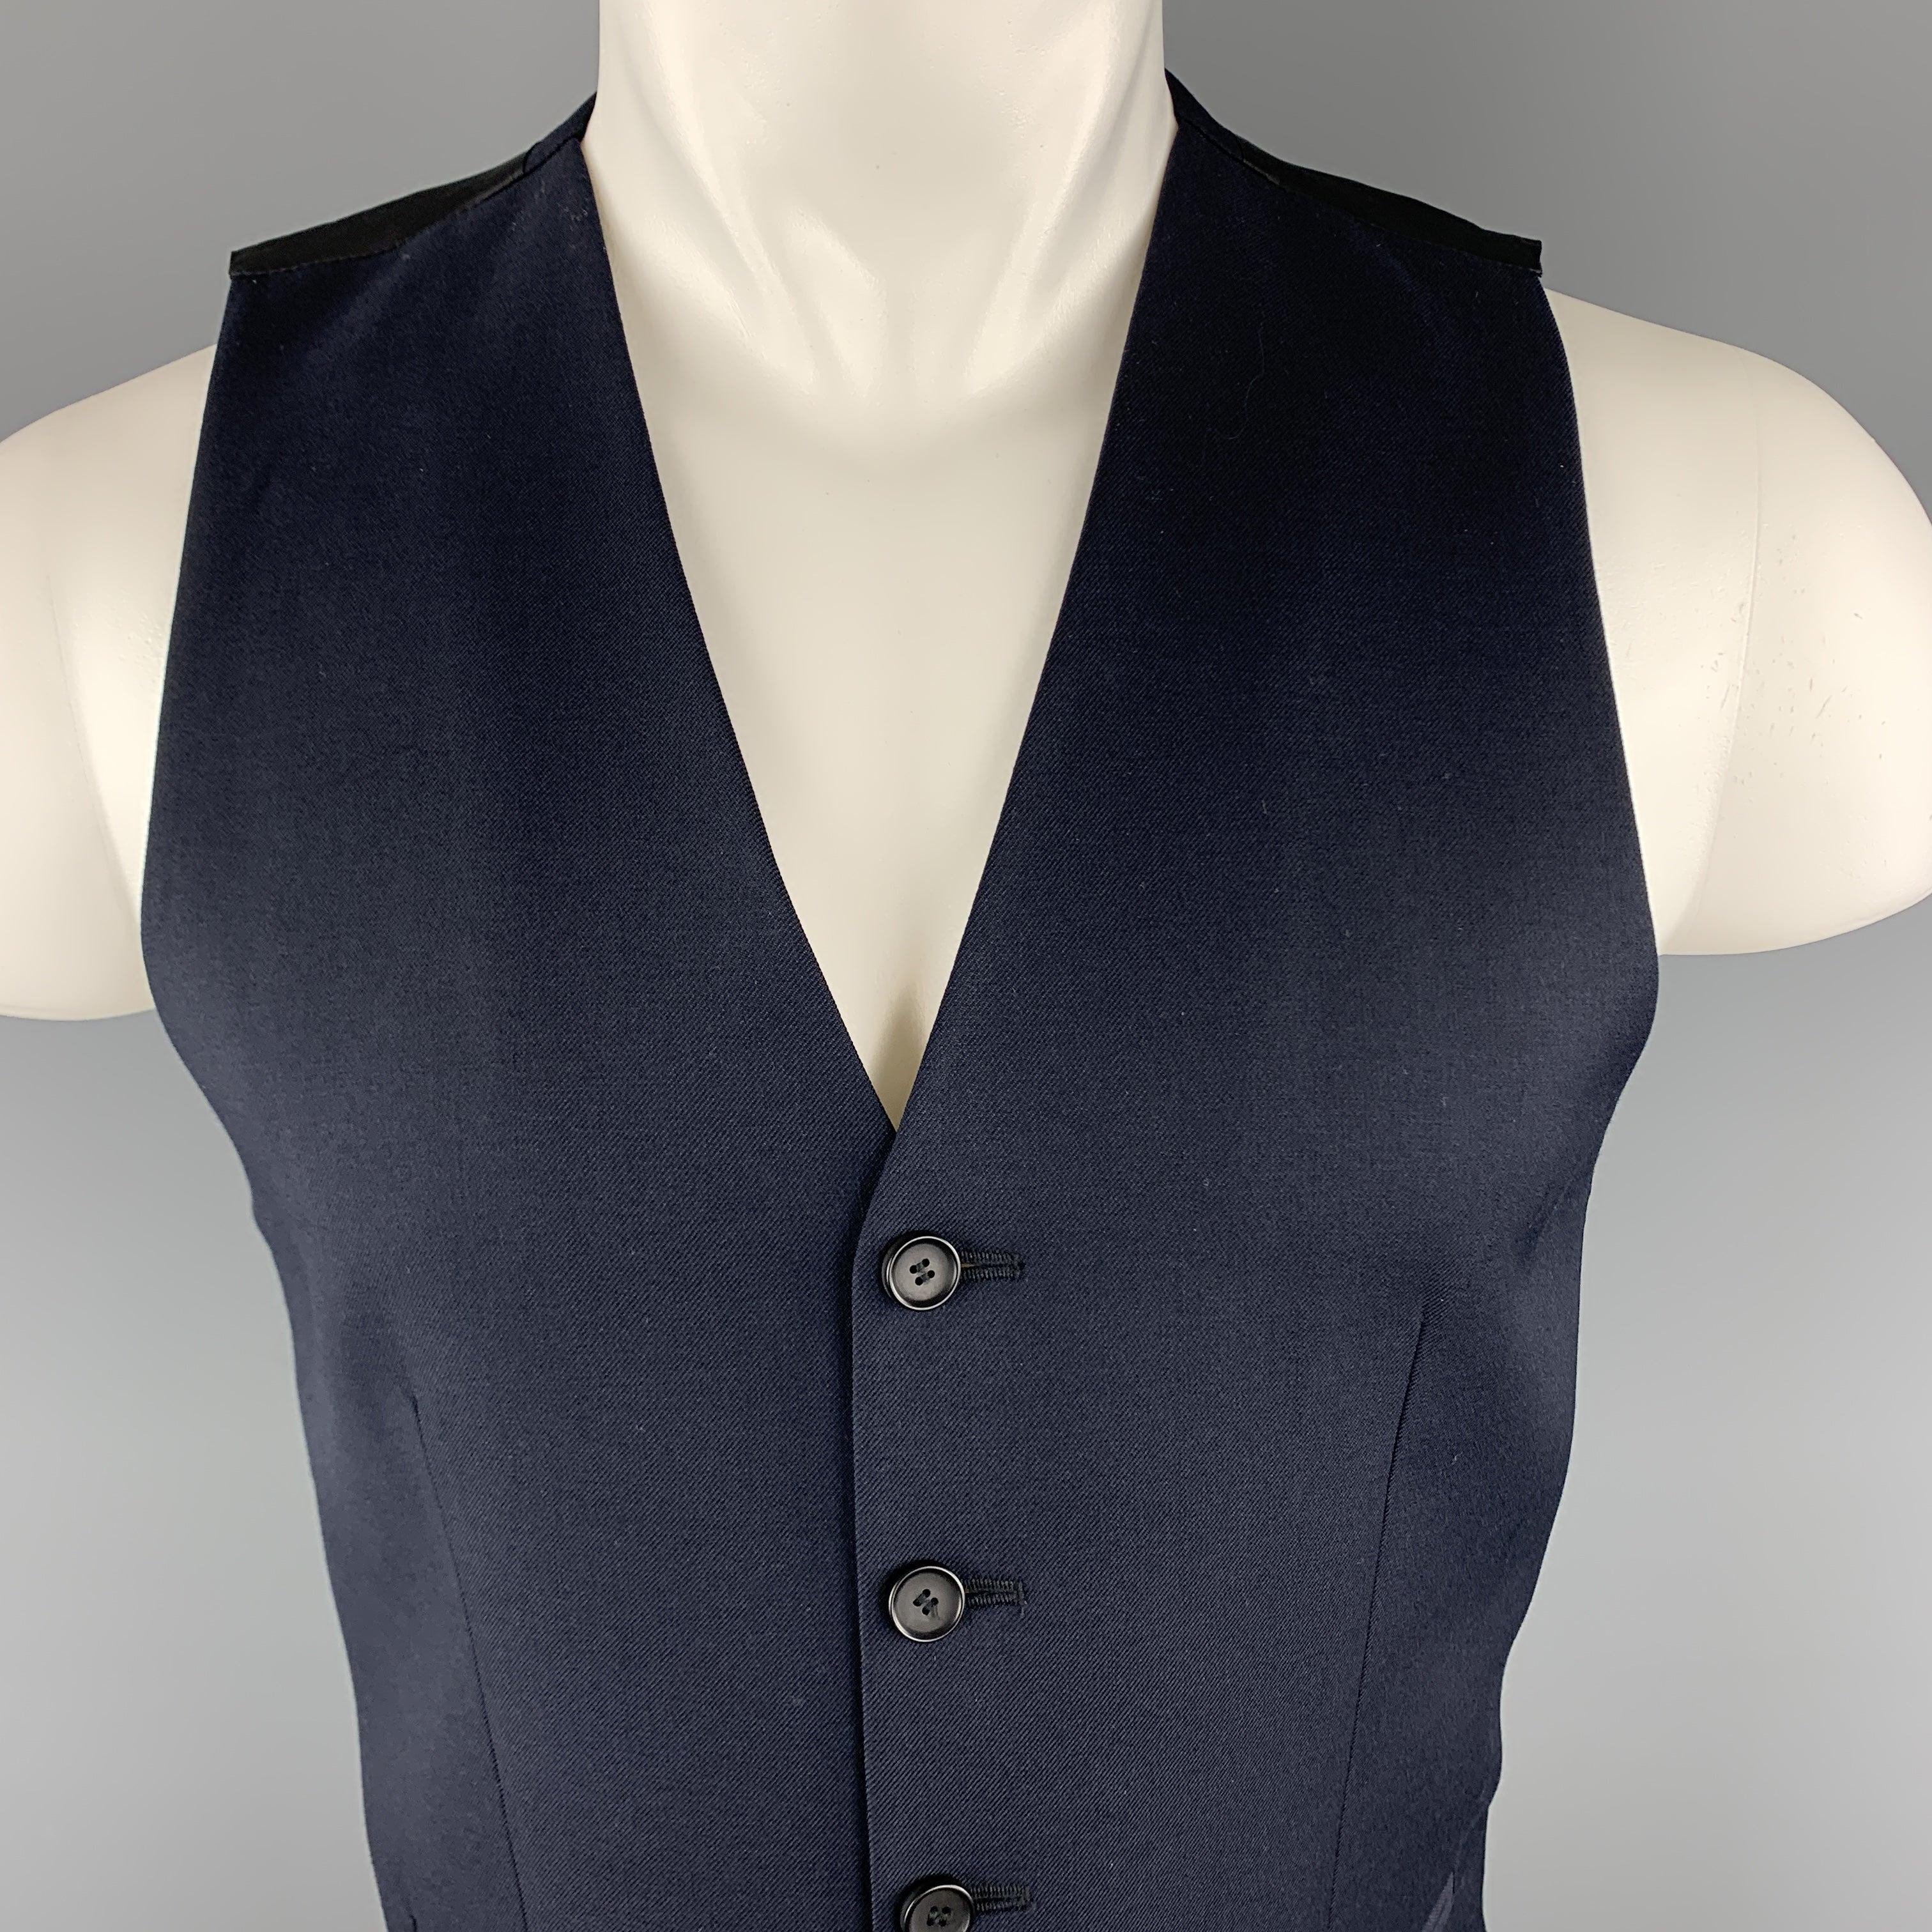 THE KOOPLES dress vest comes in navy blue wool with a black satin back.
New with Tags. 

Marked:   IT 46 

Measurements: 
 
Shoulder:
12 inches Chest:
37 inches Length: 24 inches 
  
  
 
Reference: 100771
Category: Vest (Formal)
More Details
   